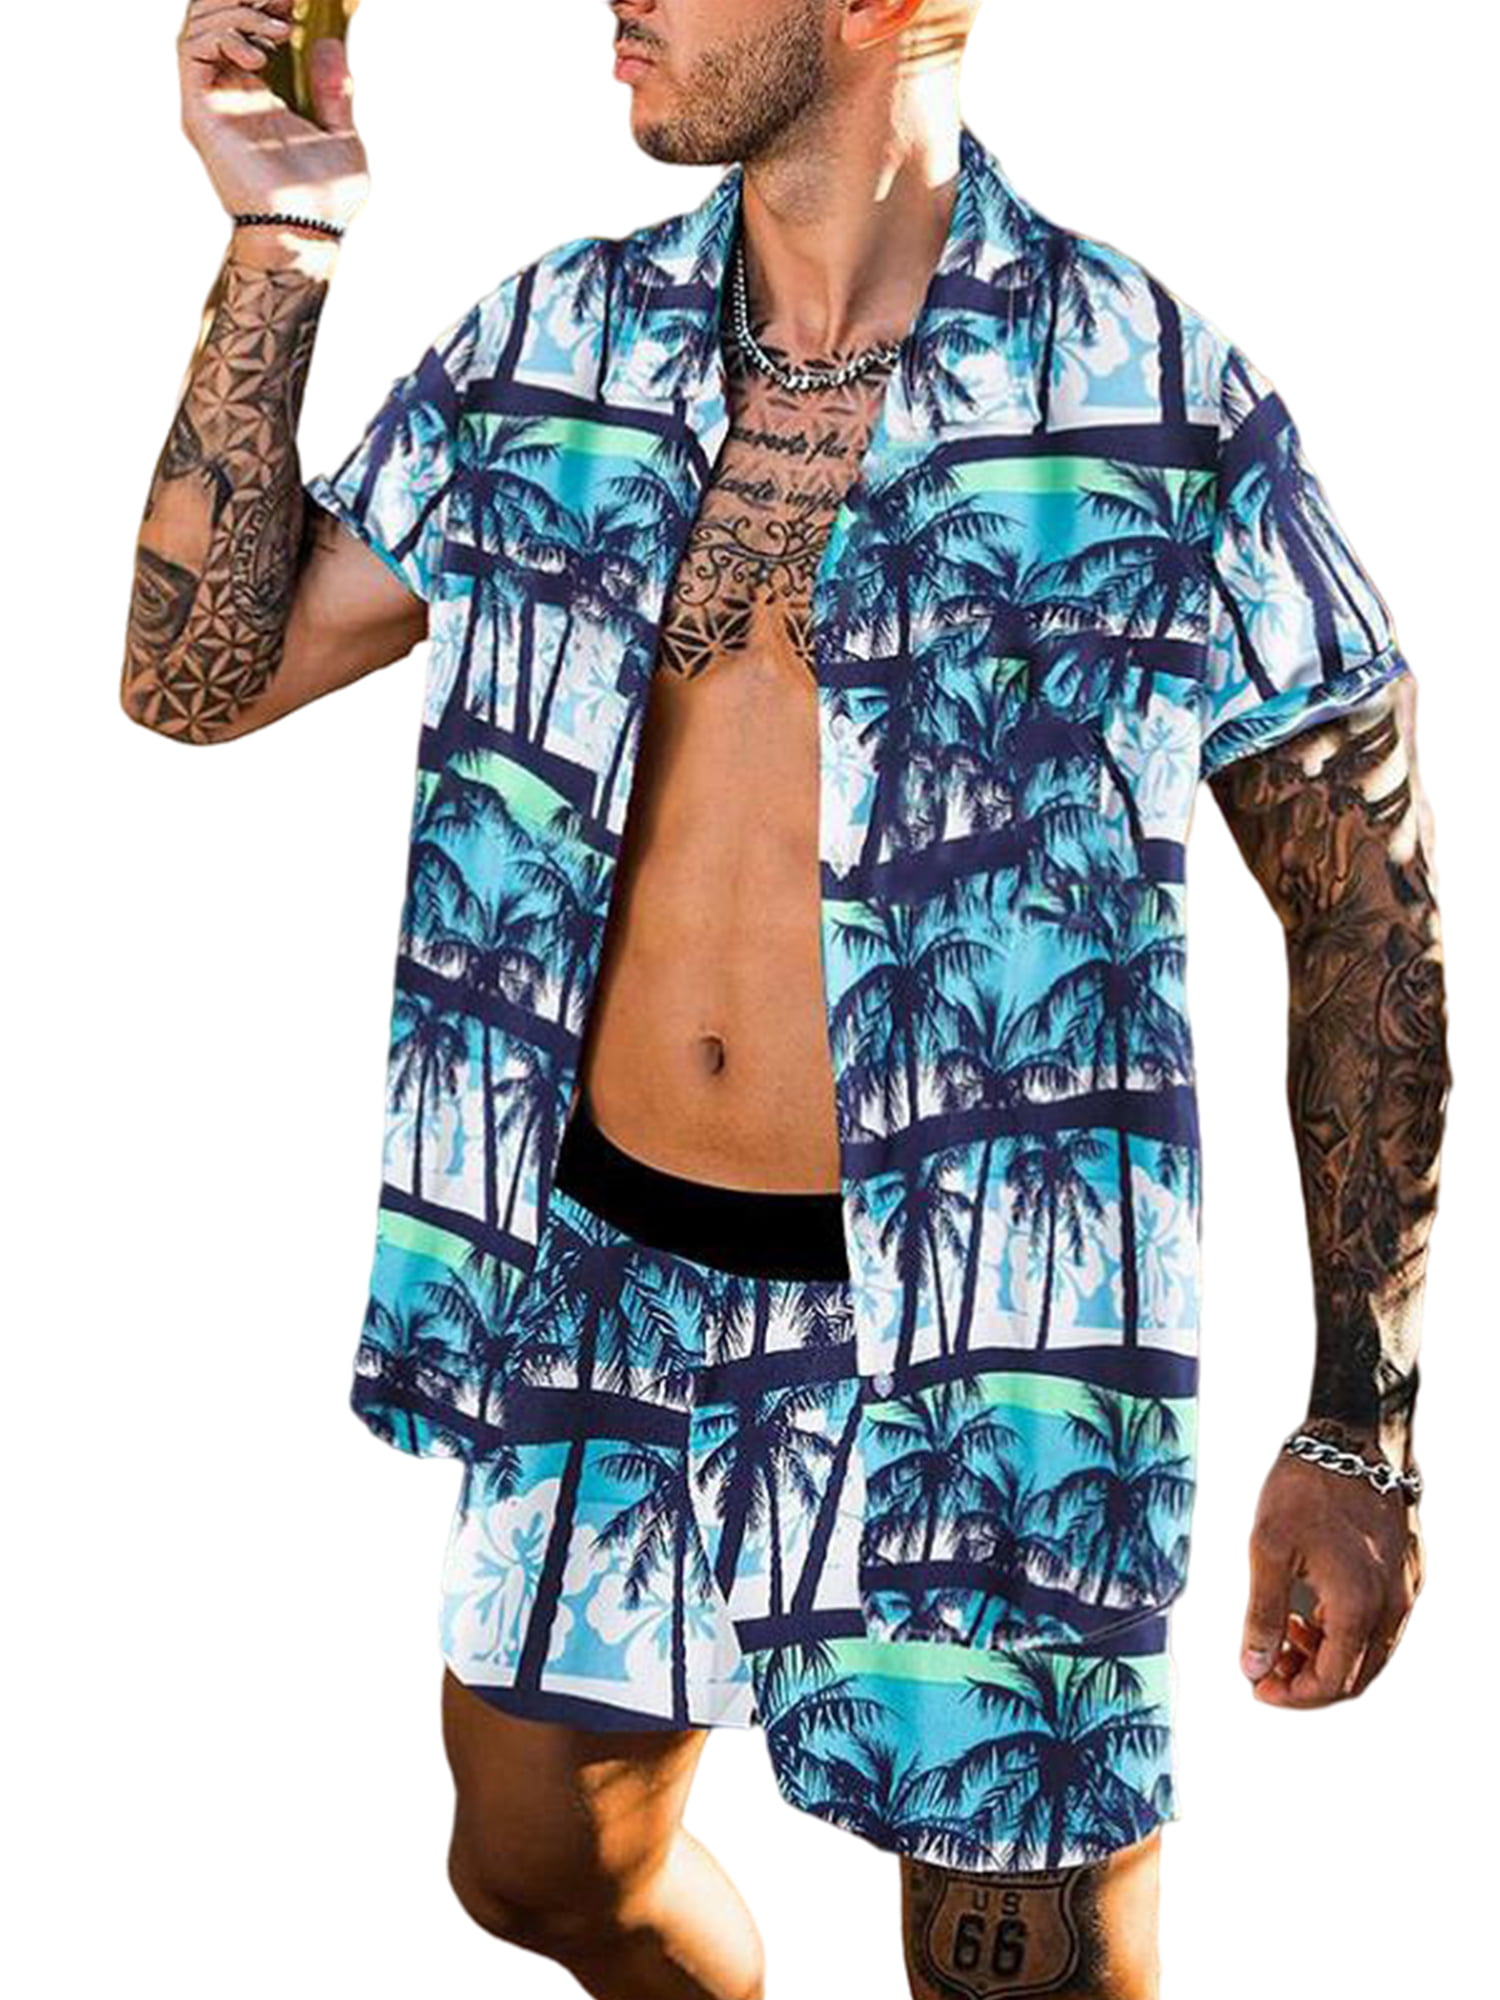 Men's Short Sleeve Tracksuit Floral Hawaiian Shirt and Shorts Suit Fashion 2 Piece Beach Outfits Sets 